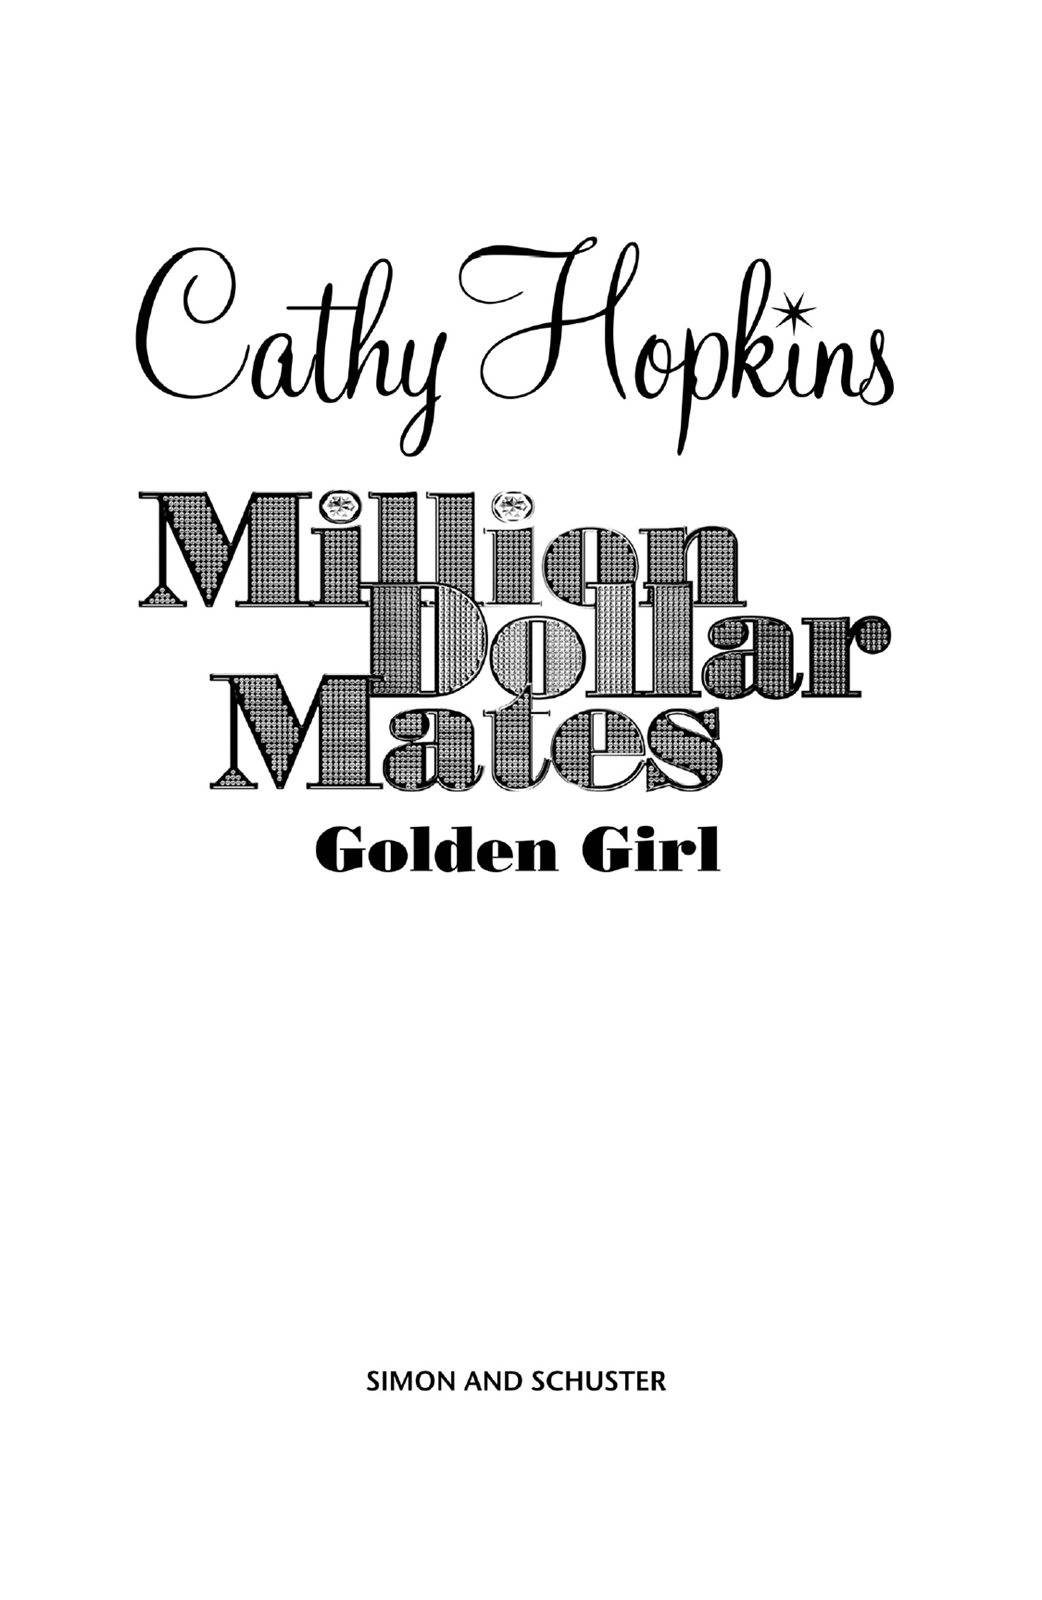 Golden Girl by Cathy Hopkins